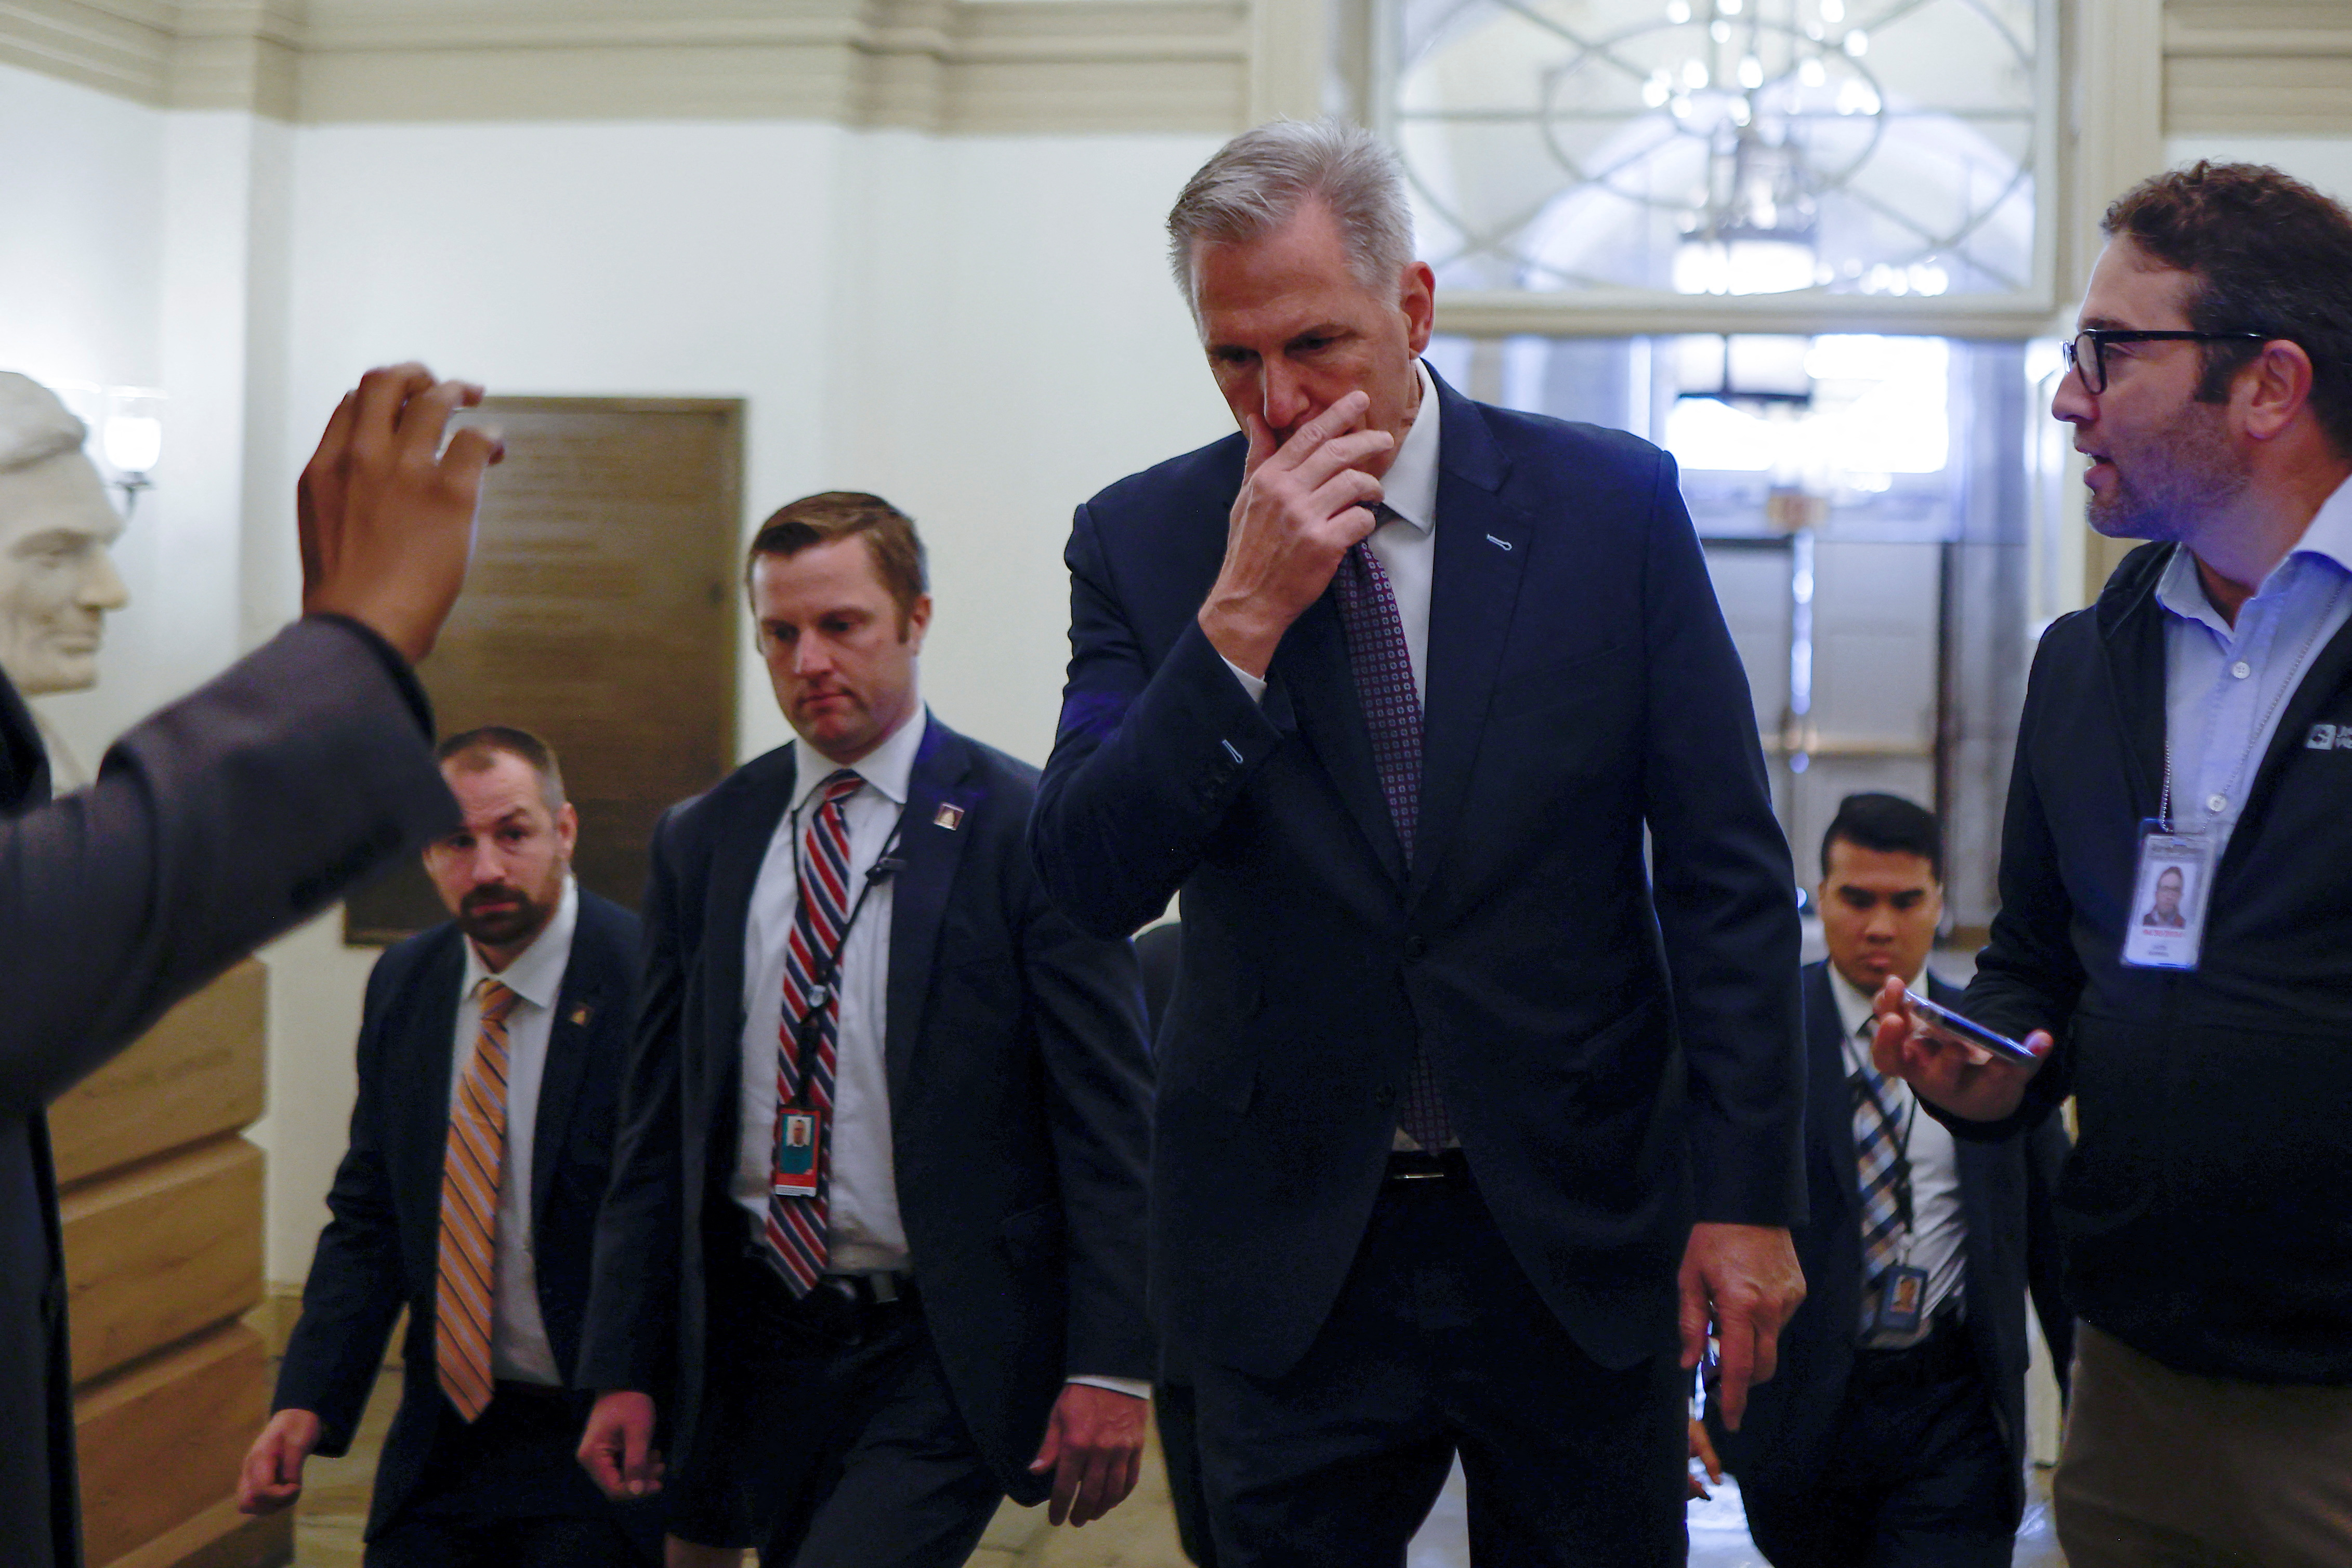 U.S. House Speaker McCarthy arrives for the day at the U.S. Capitol in Washington